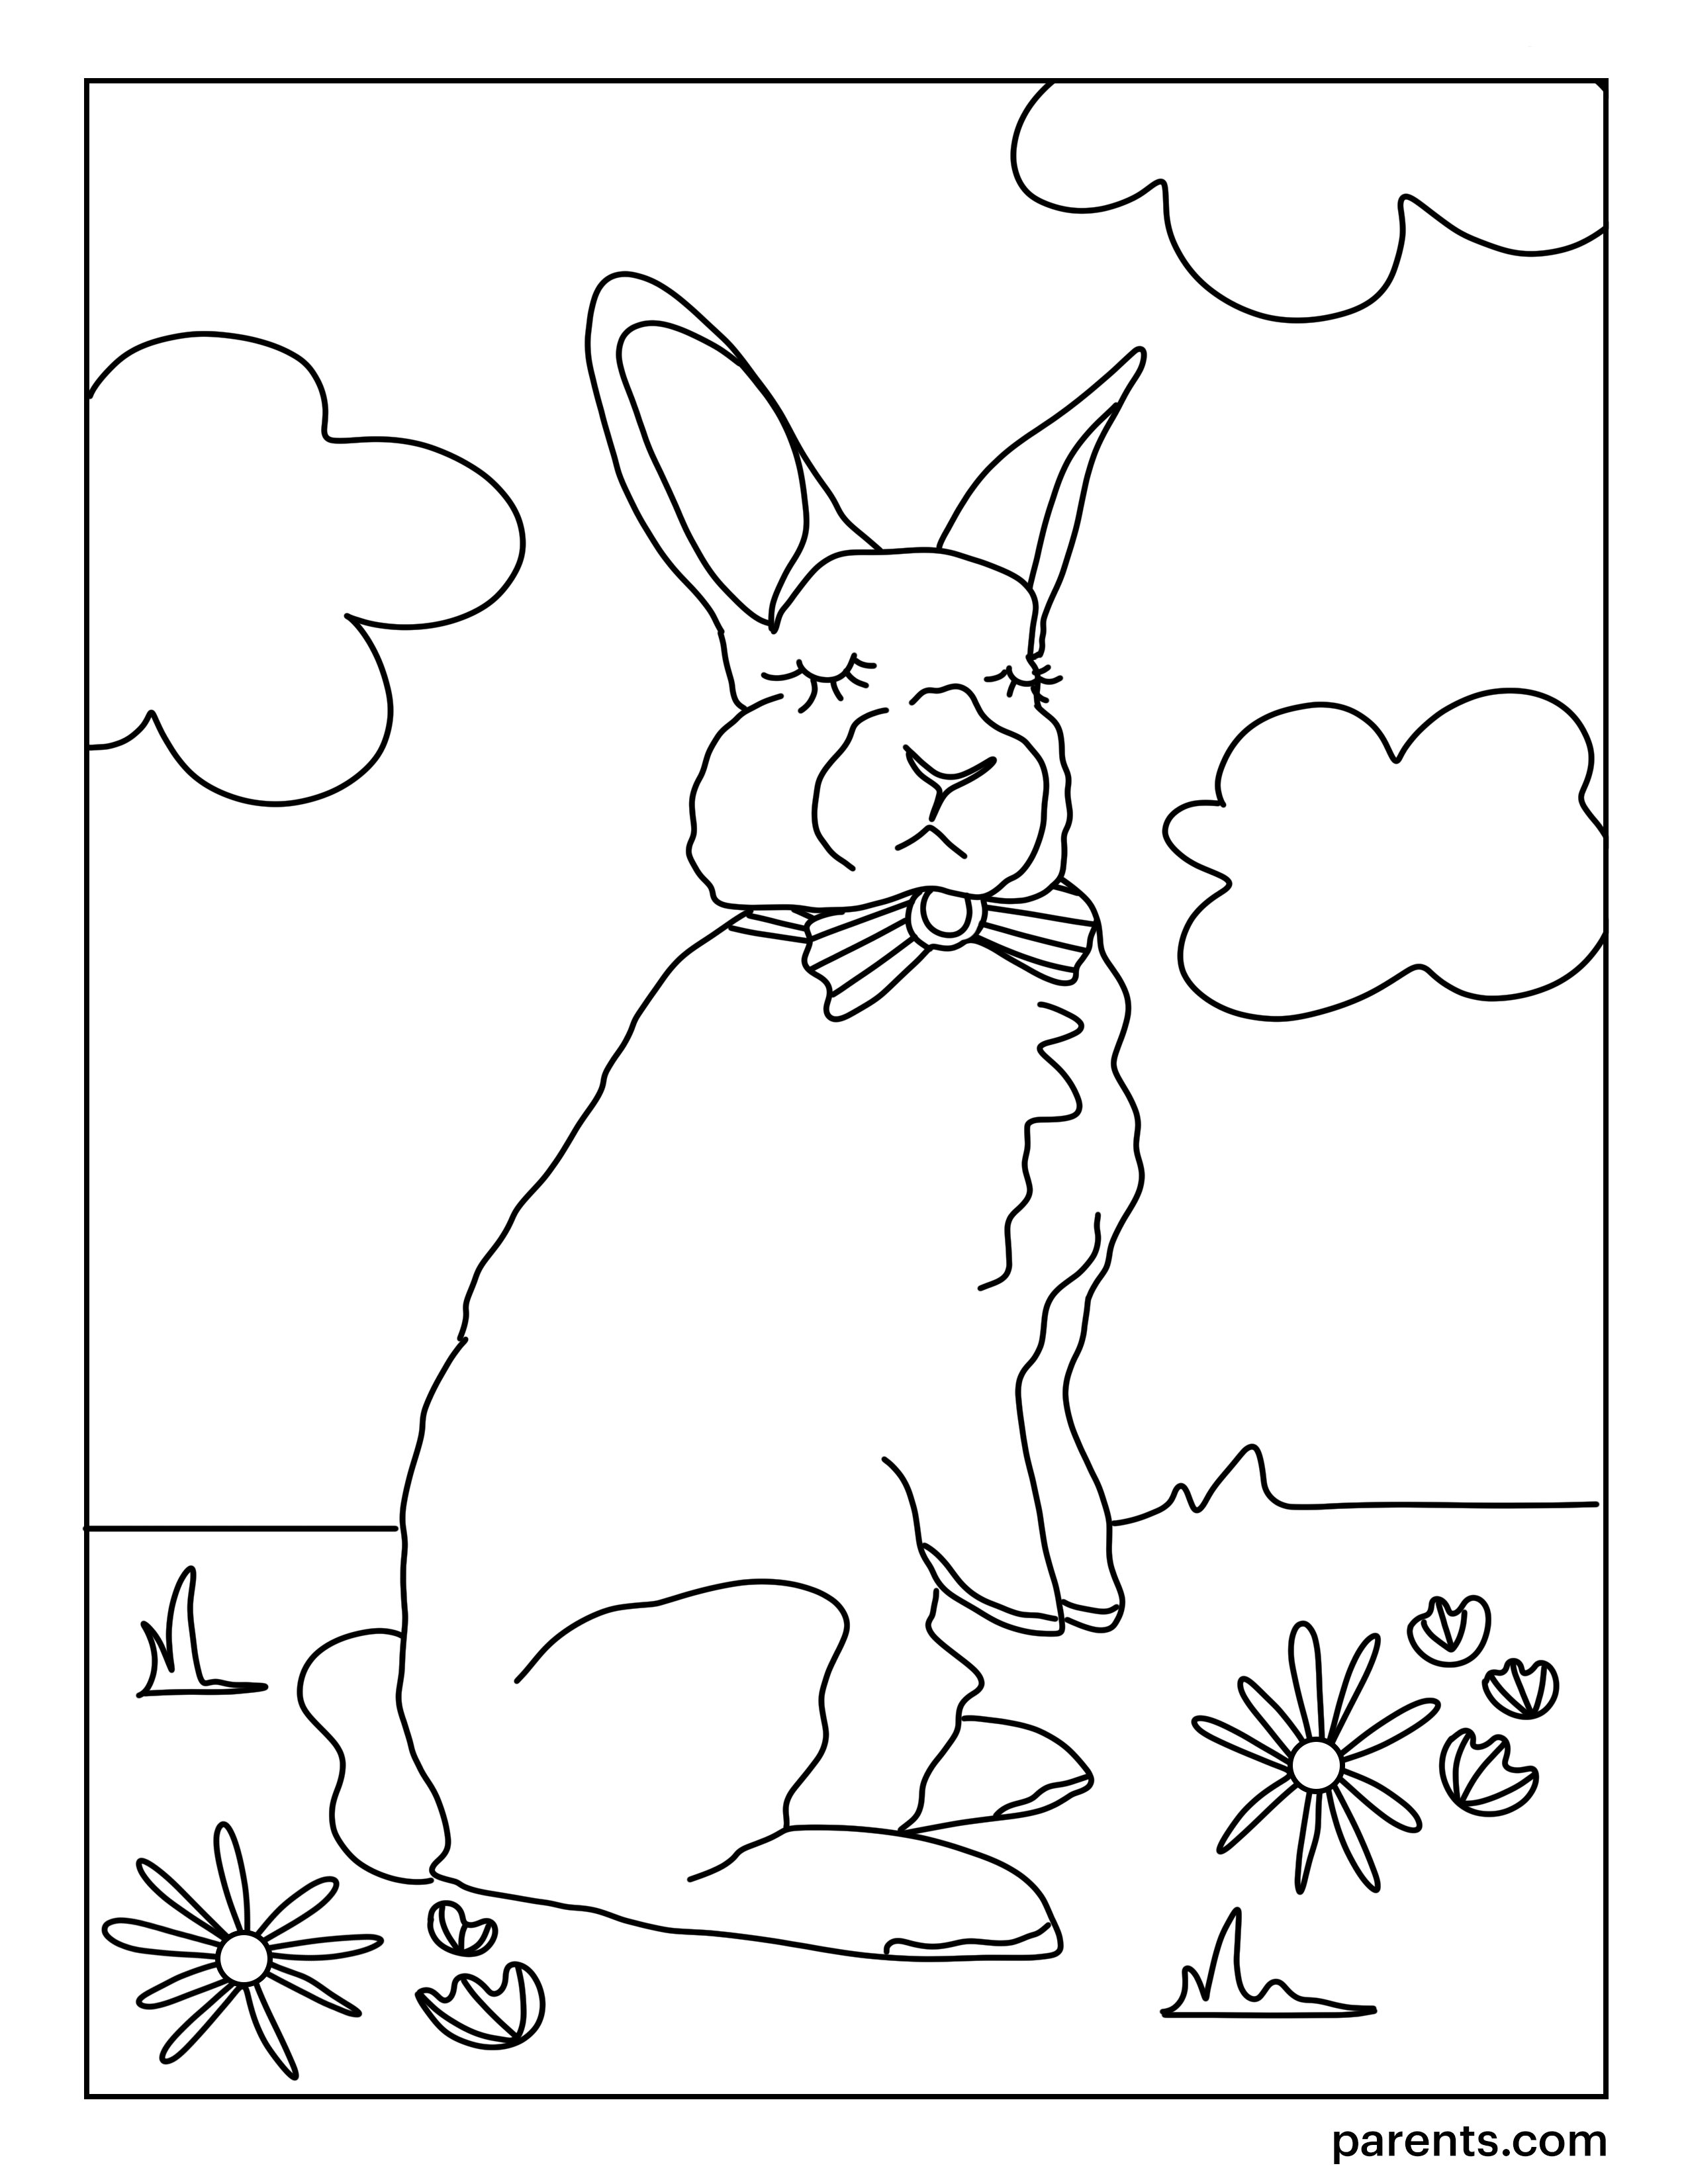 10 Free Easter Coloring Pages for Kids | Parents